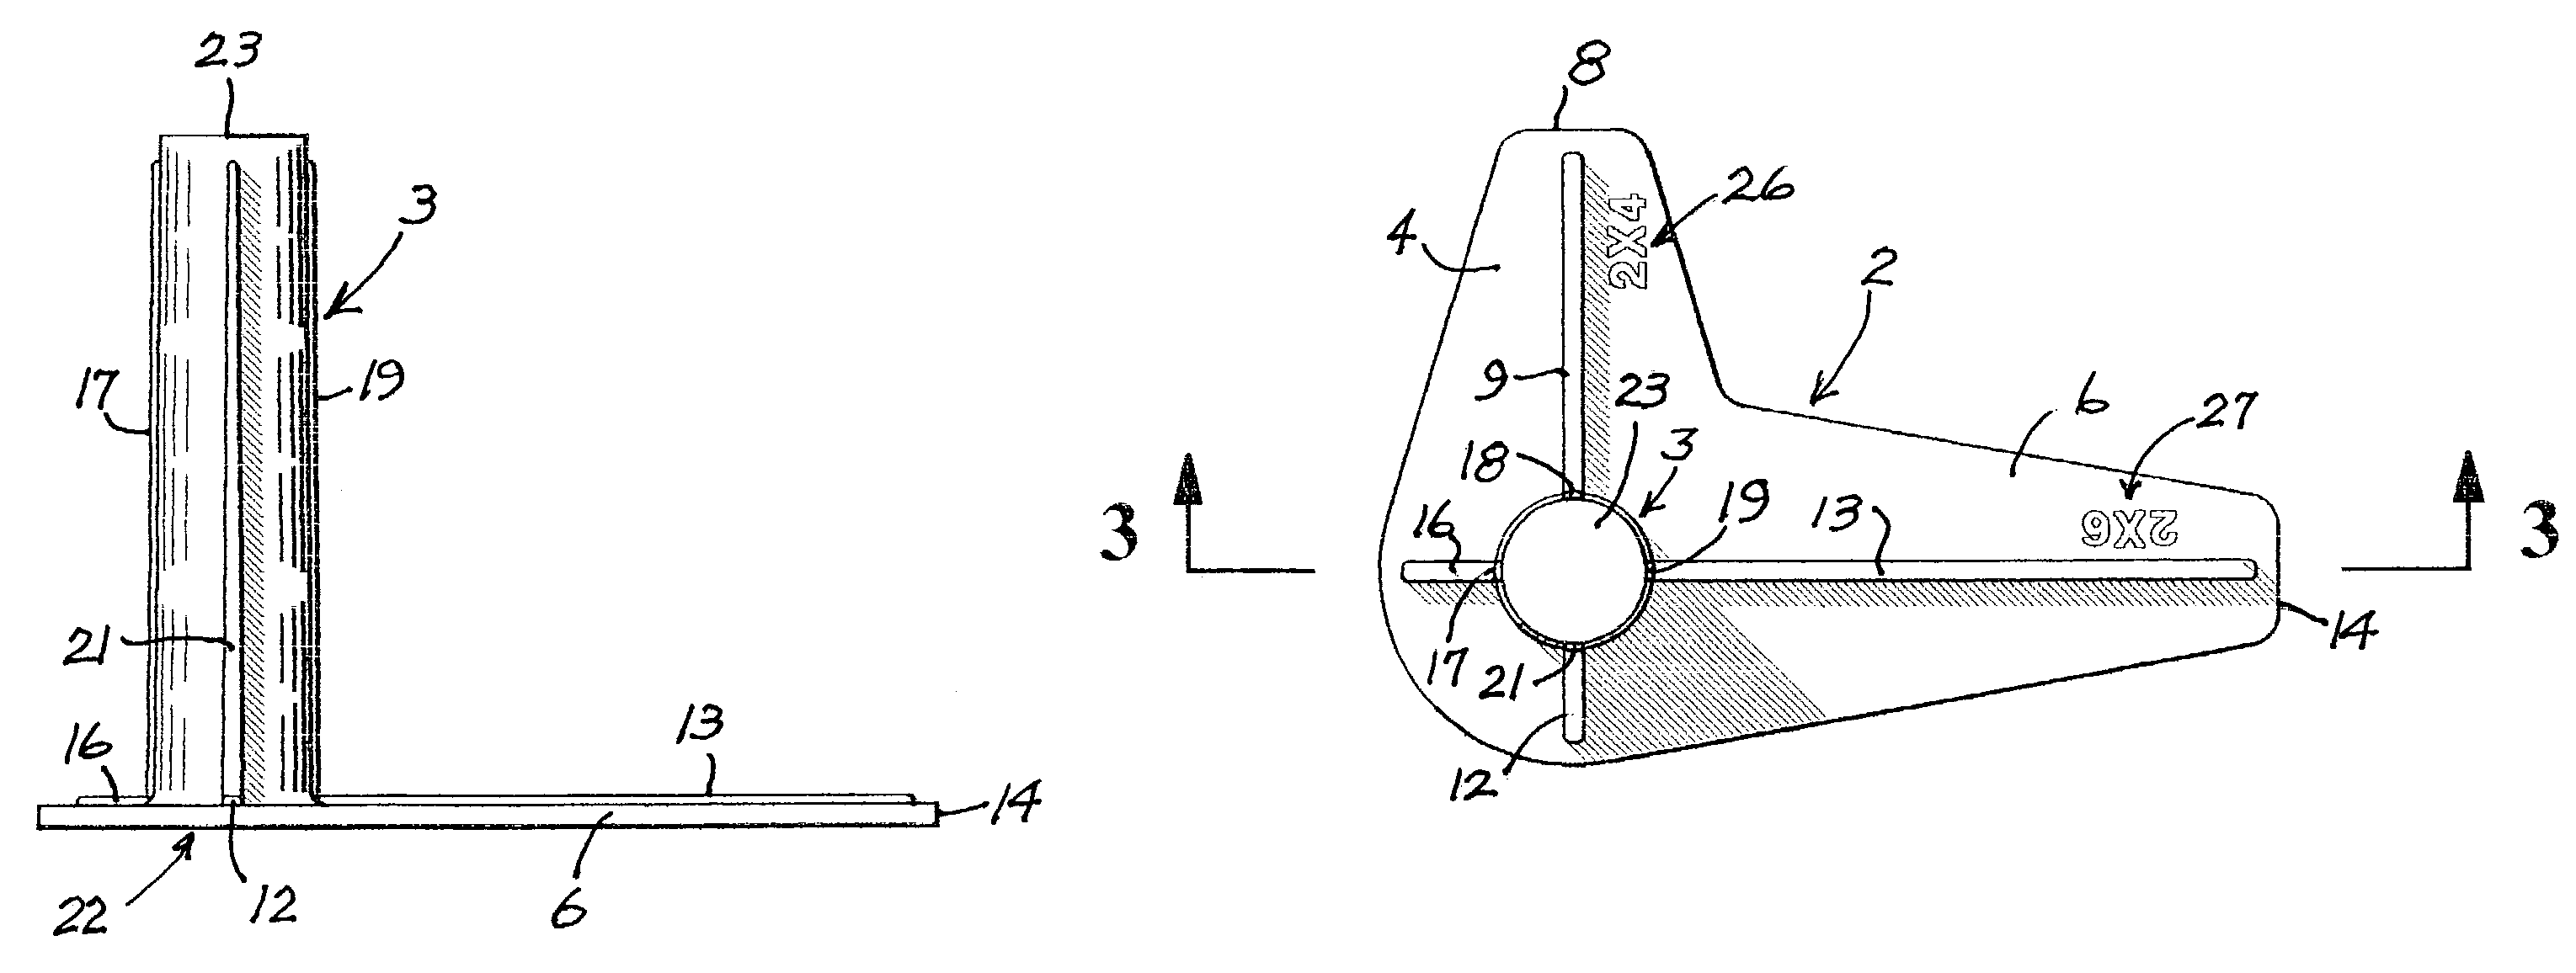 Anchor bolt placement and protection device